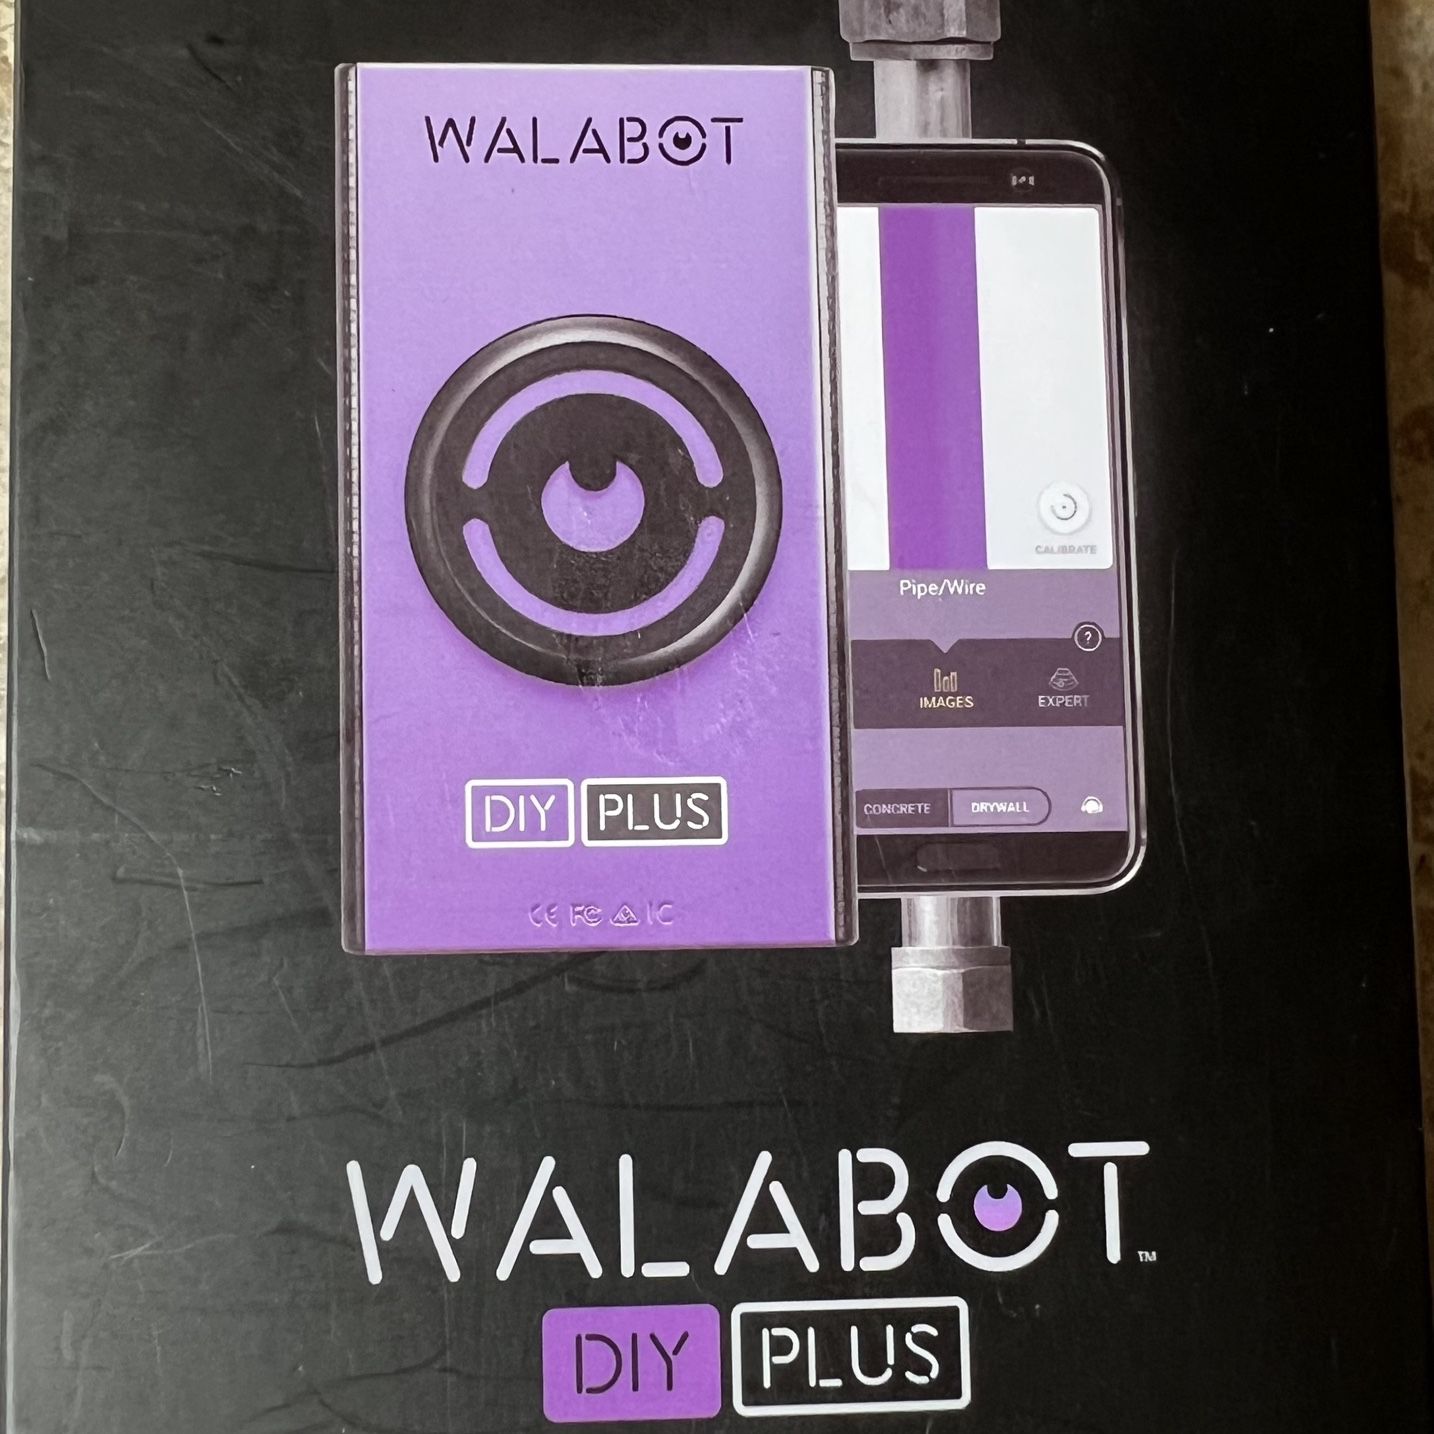 Unfortunately not! Walabot DIY does give you X-ray vision when it